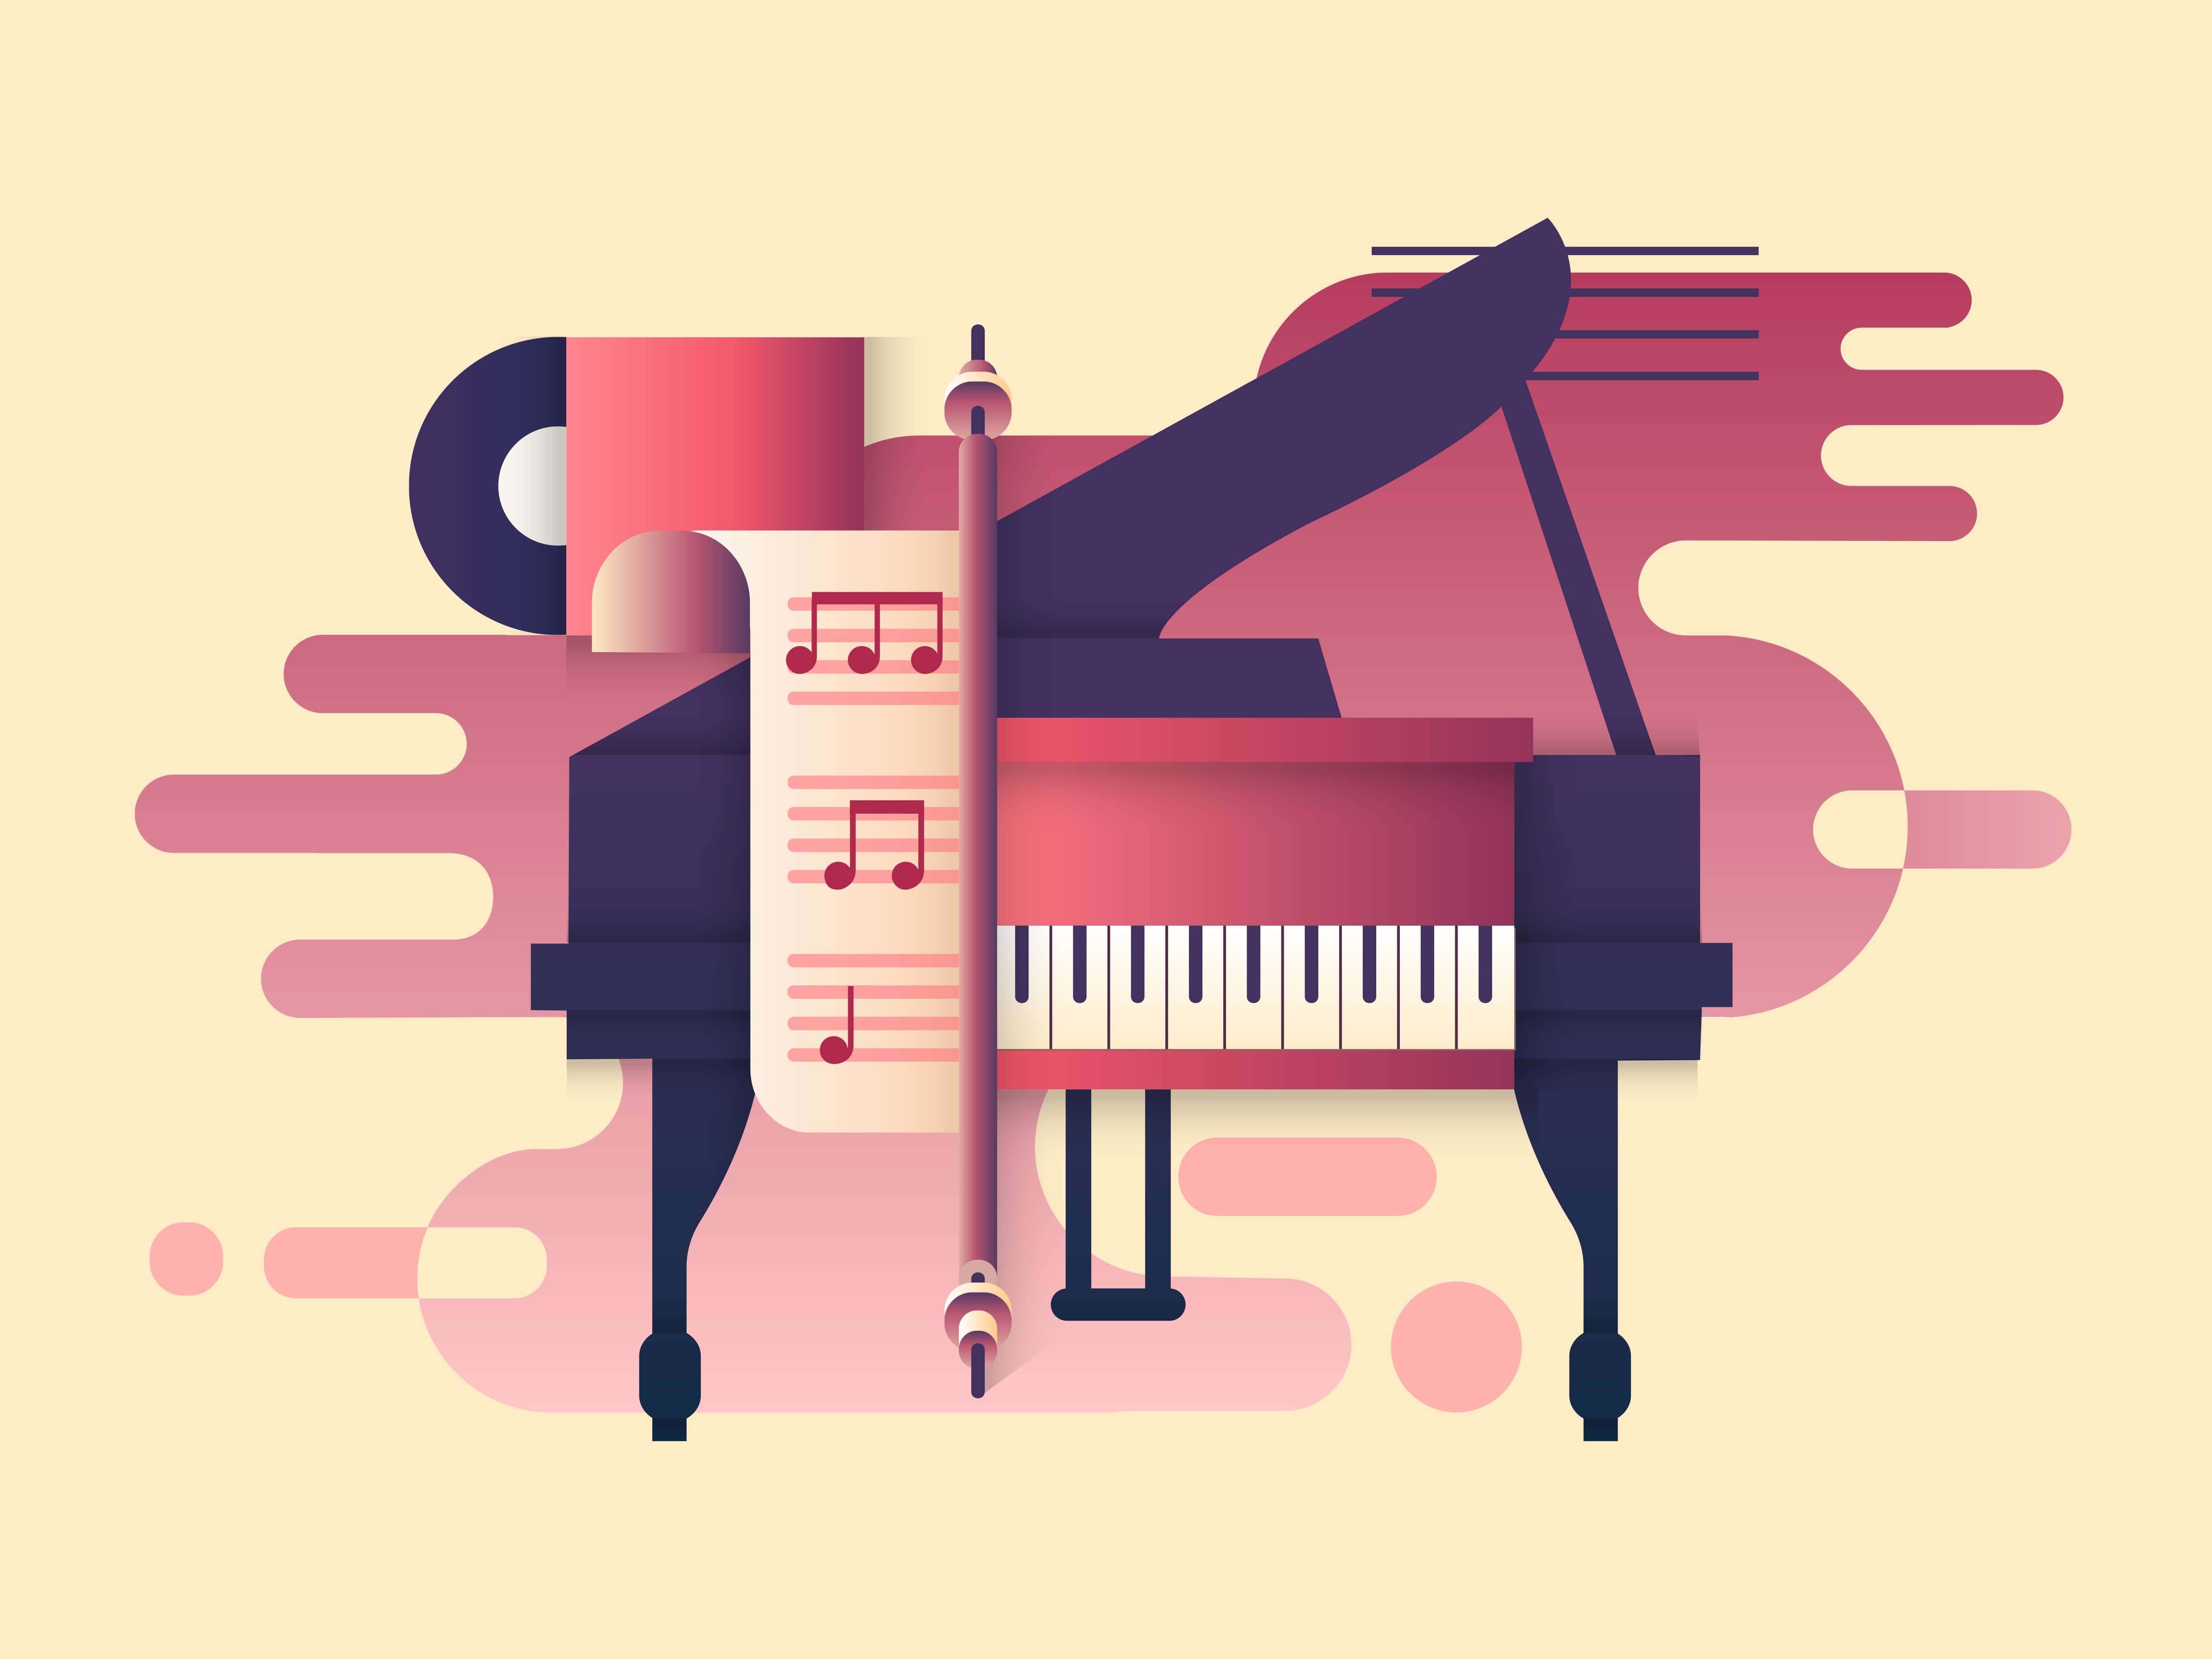 Graphics in pink and purple tones. Piano and score.